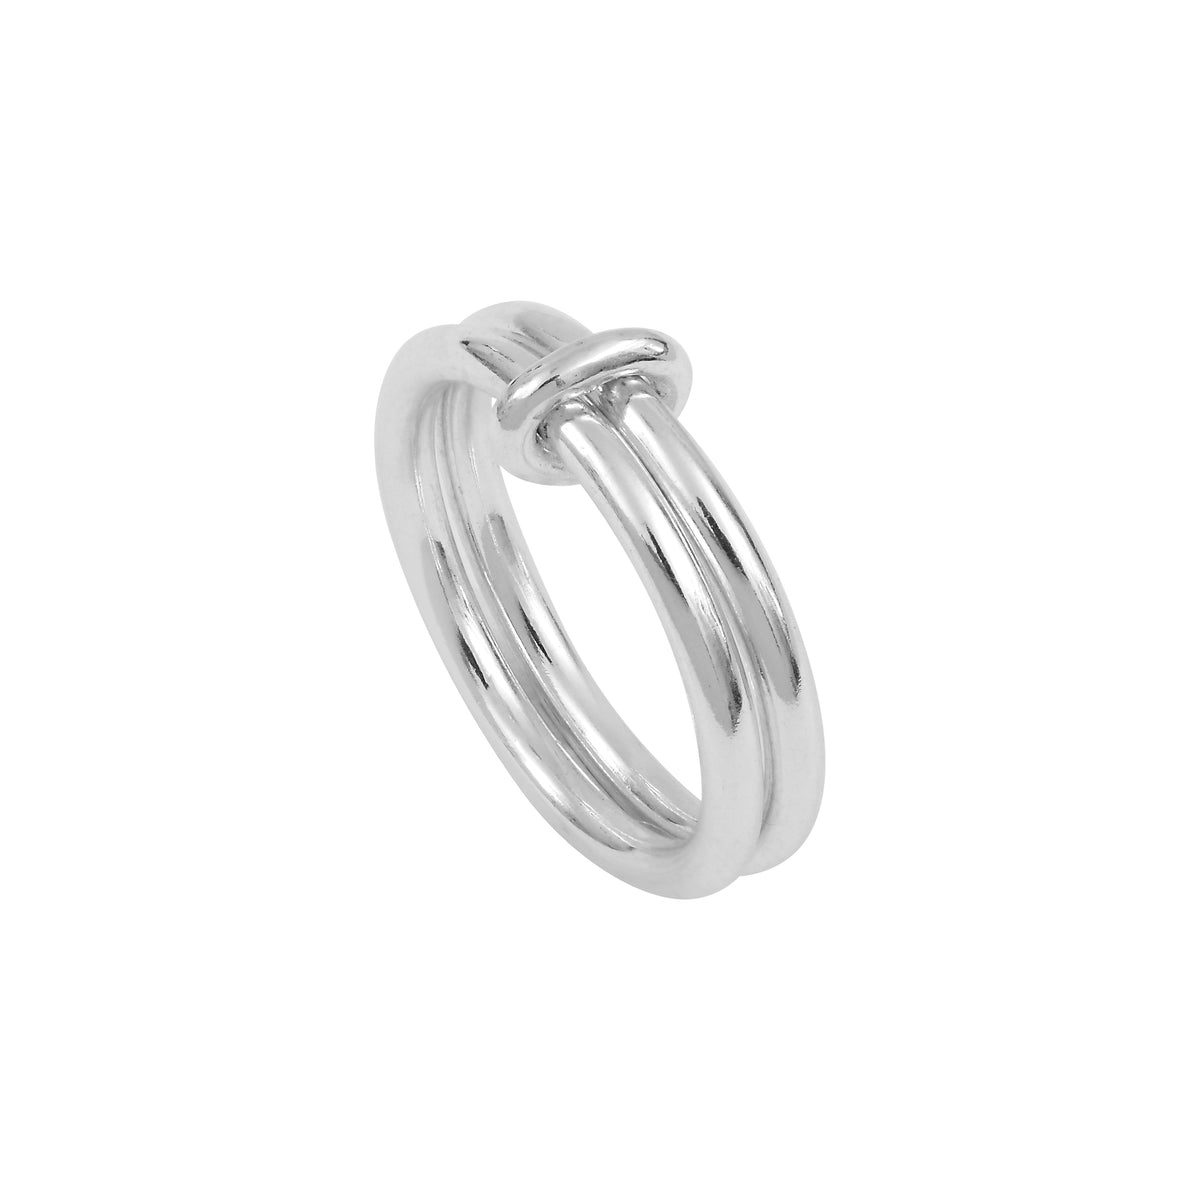 Photo of the Billie 2mm silver ring on a white background. The Billie 2mm ring is made of 925°°° silver and is composed of two thin rings of 2mm diameter.